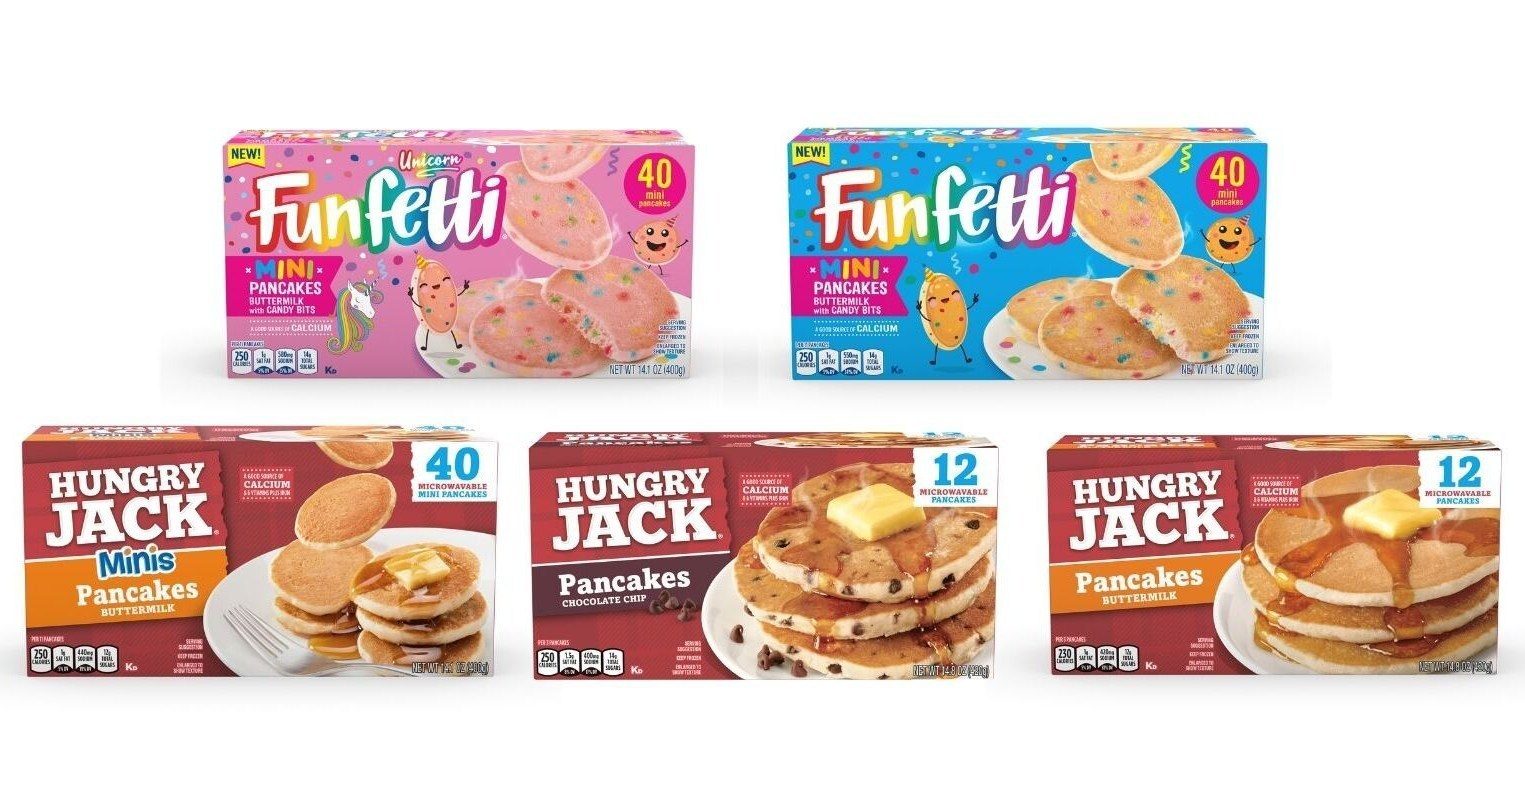 Boxes, Product line, Pancakes, Funfetti, Chocolate chip, Butter, Font